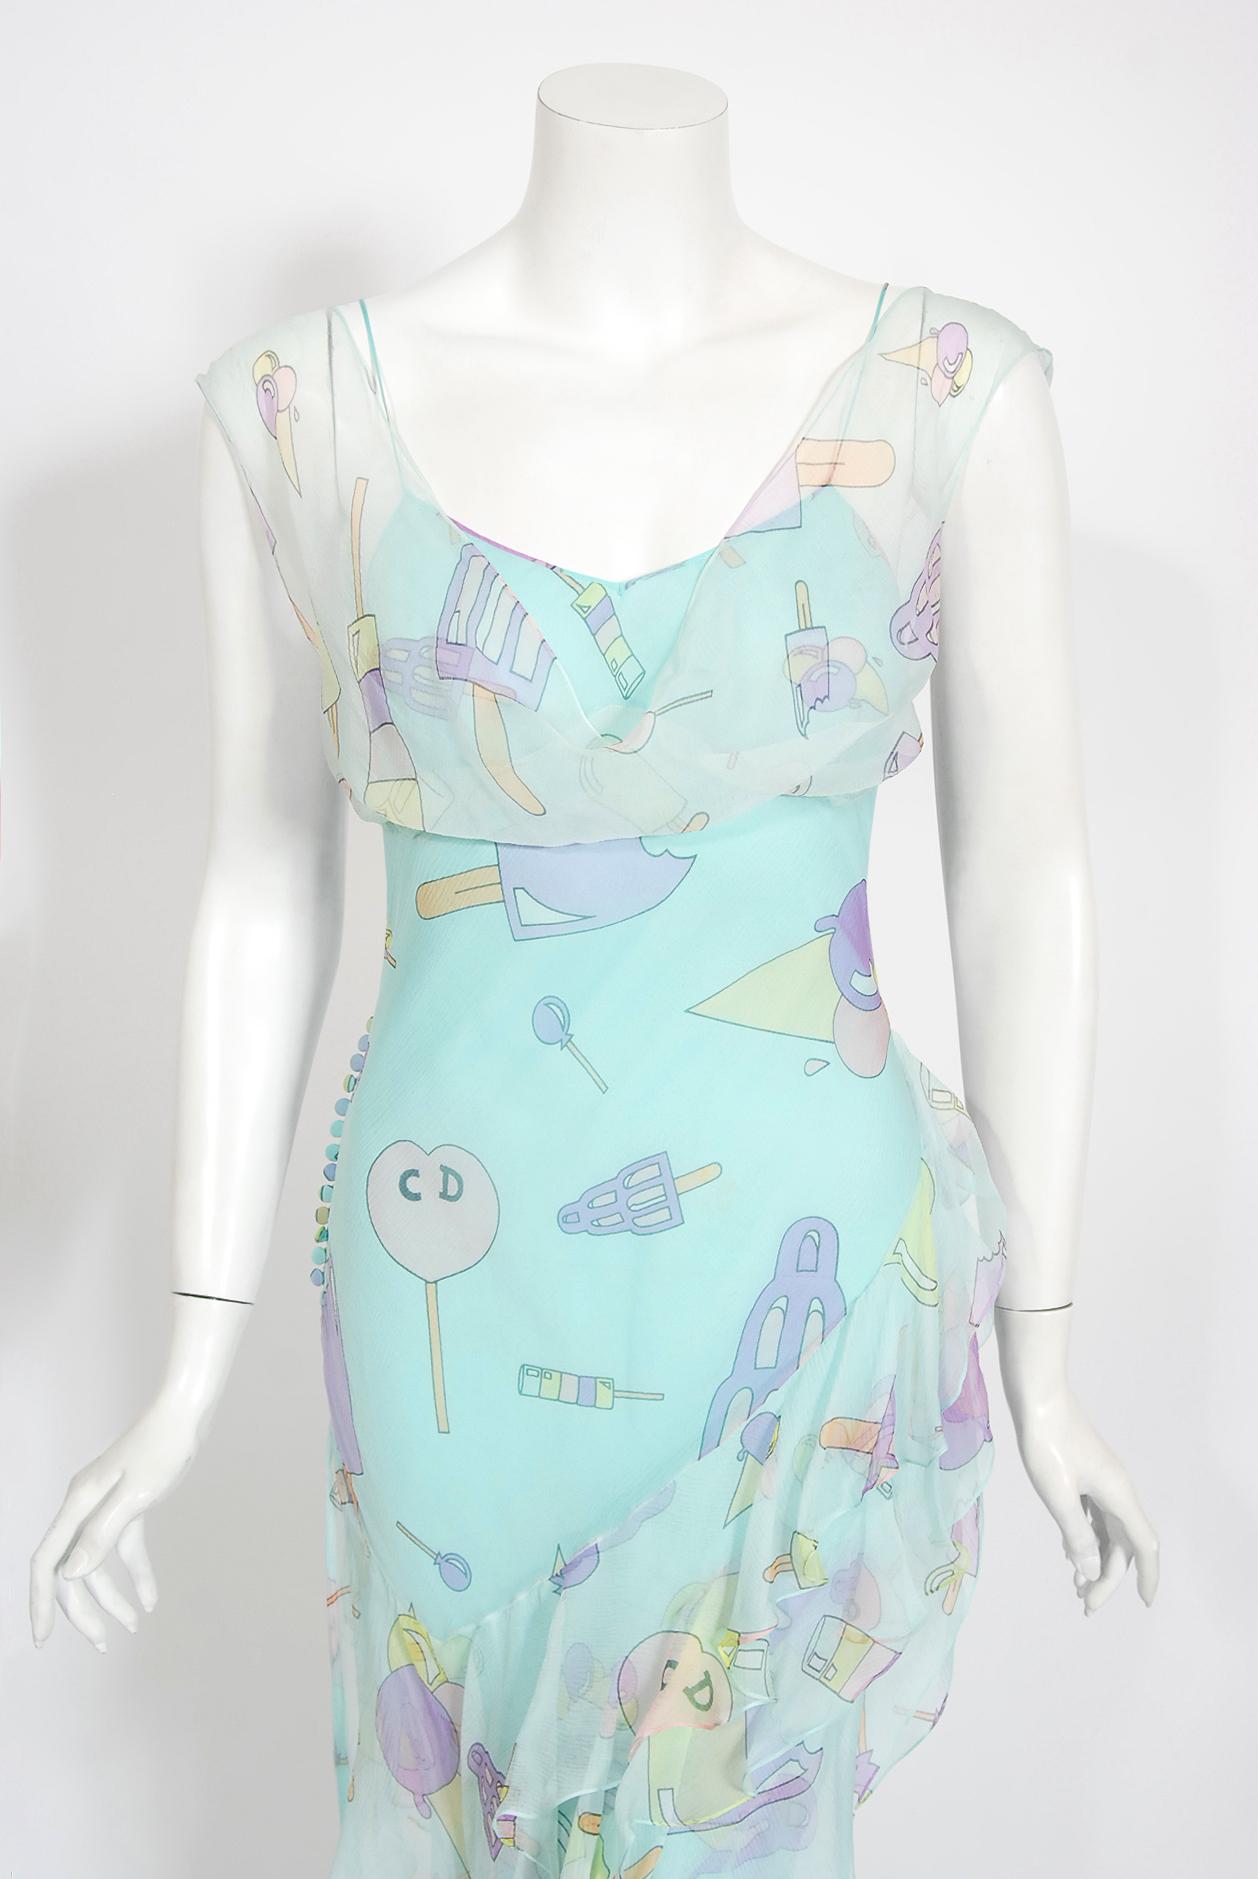 A simply stunning and whimsical Christian Dior candy and ice cream novelty logo print sheer silk bias-cut gown. This rare Christian Dior treasure from John Galliano's celebrated 2002 spring-summer collection is a perfect example of his genius. Vogue